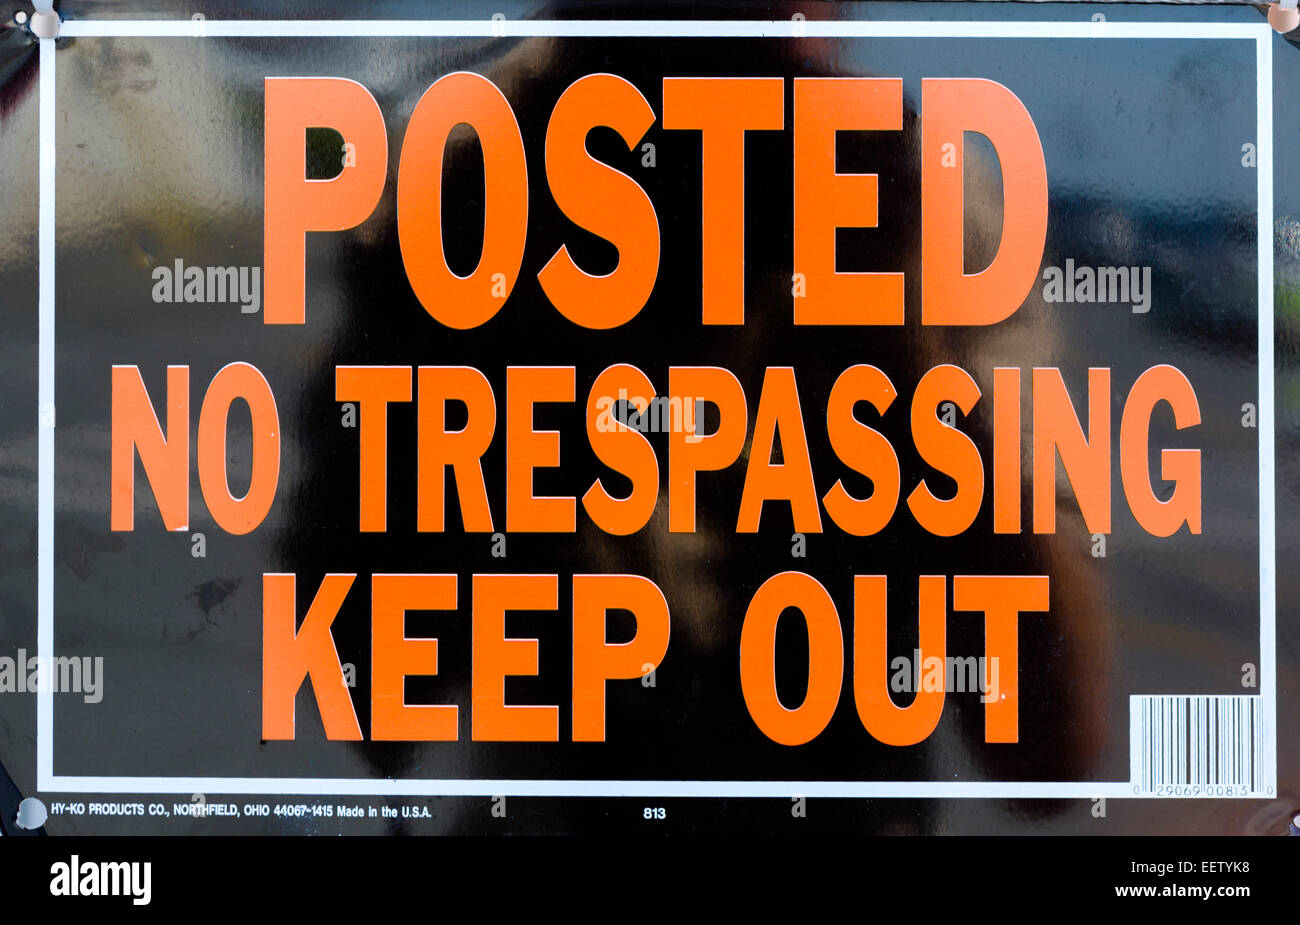 Posted No Trespassing Keep Out sign Stock Photo